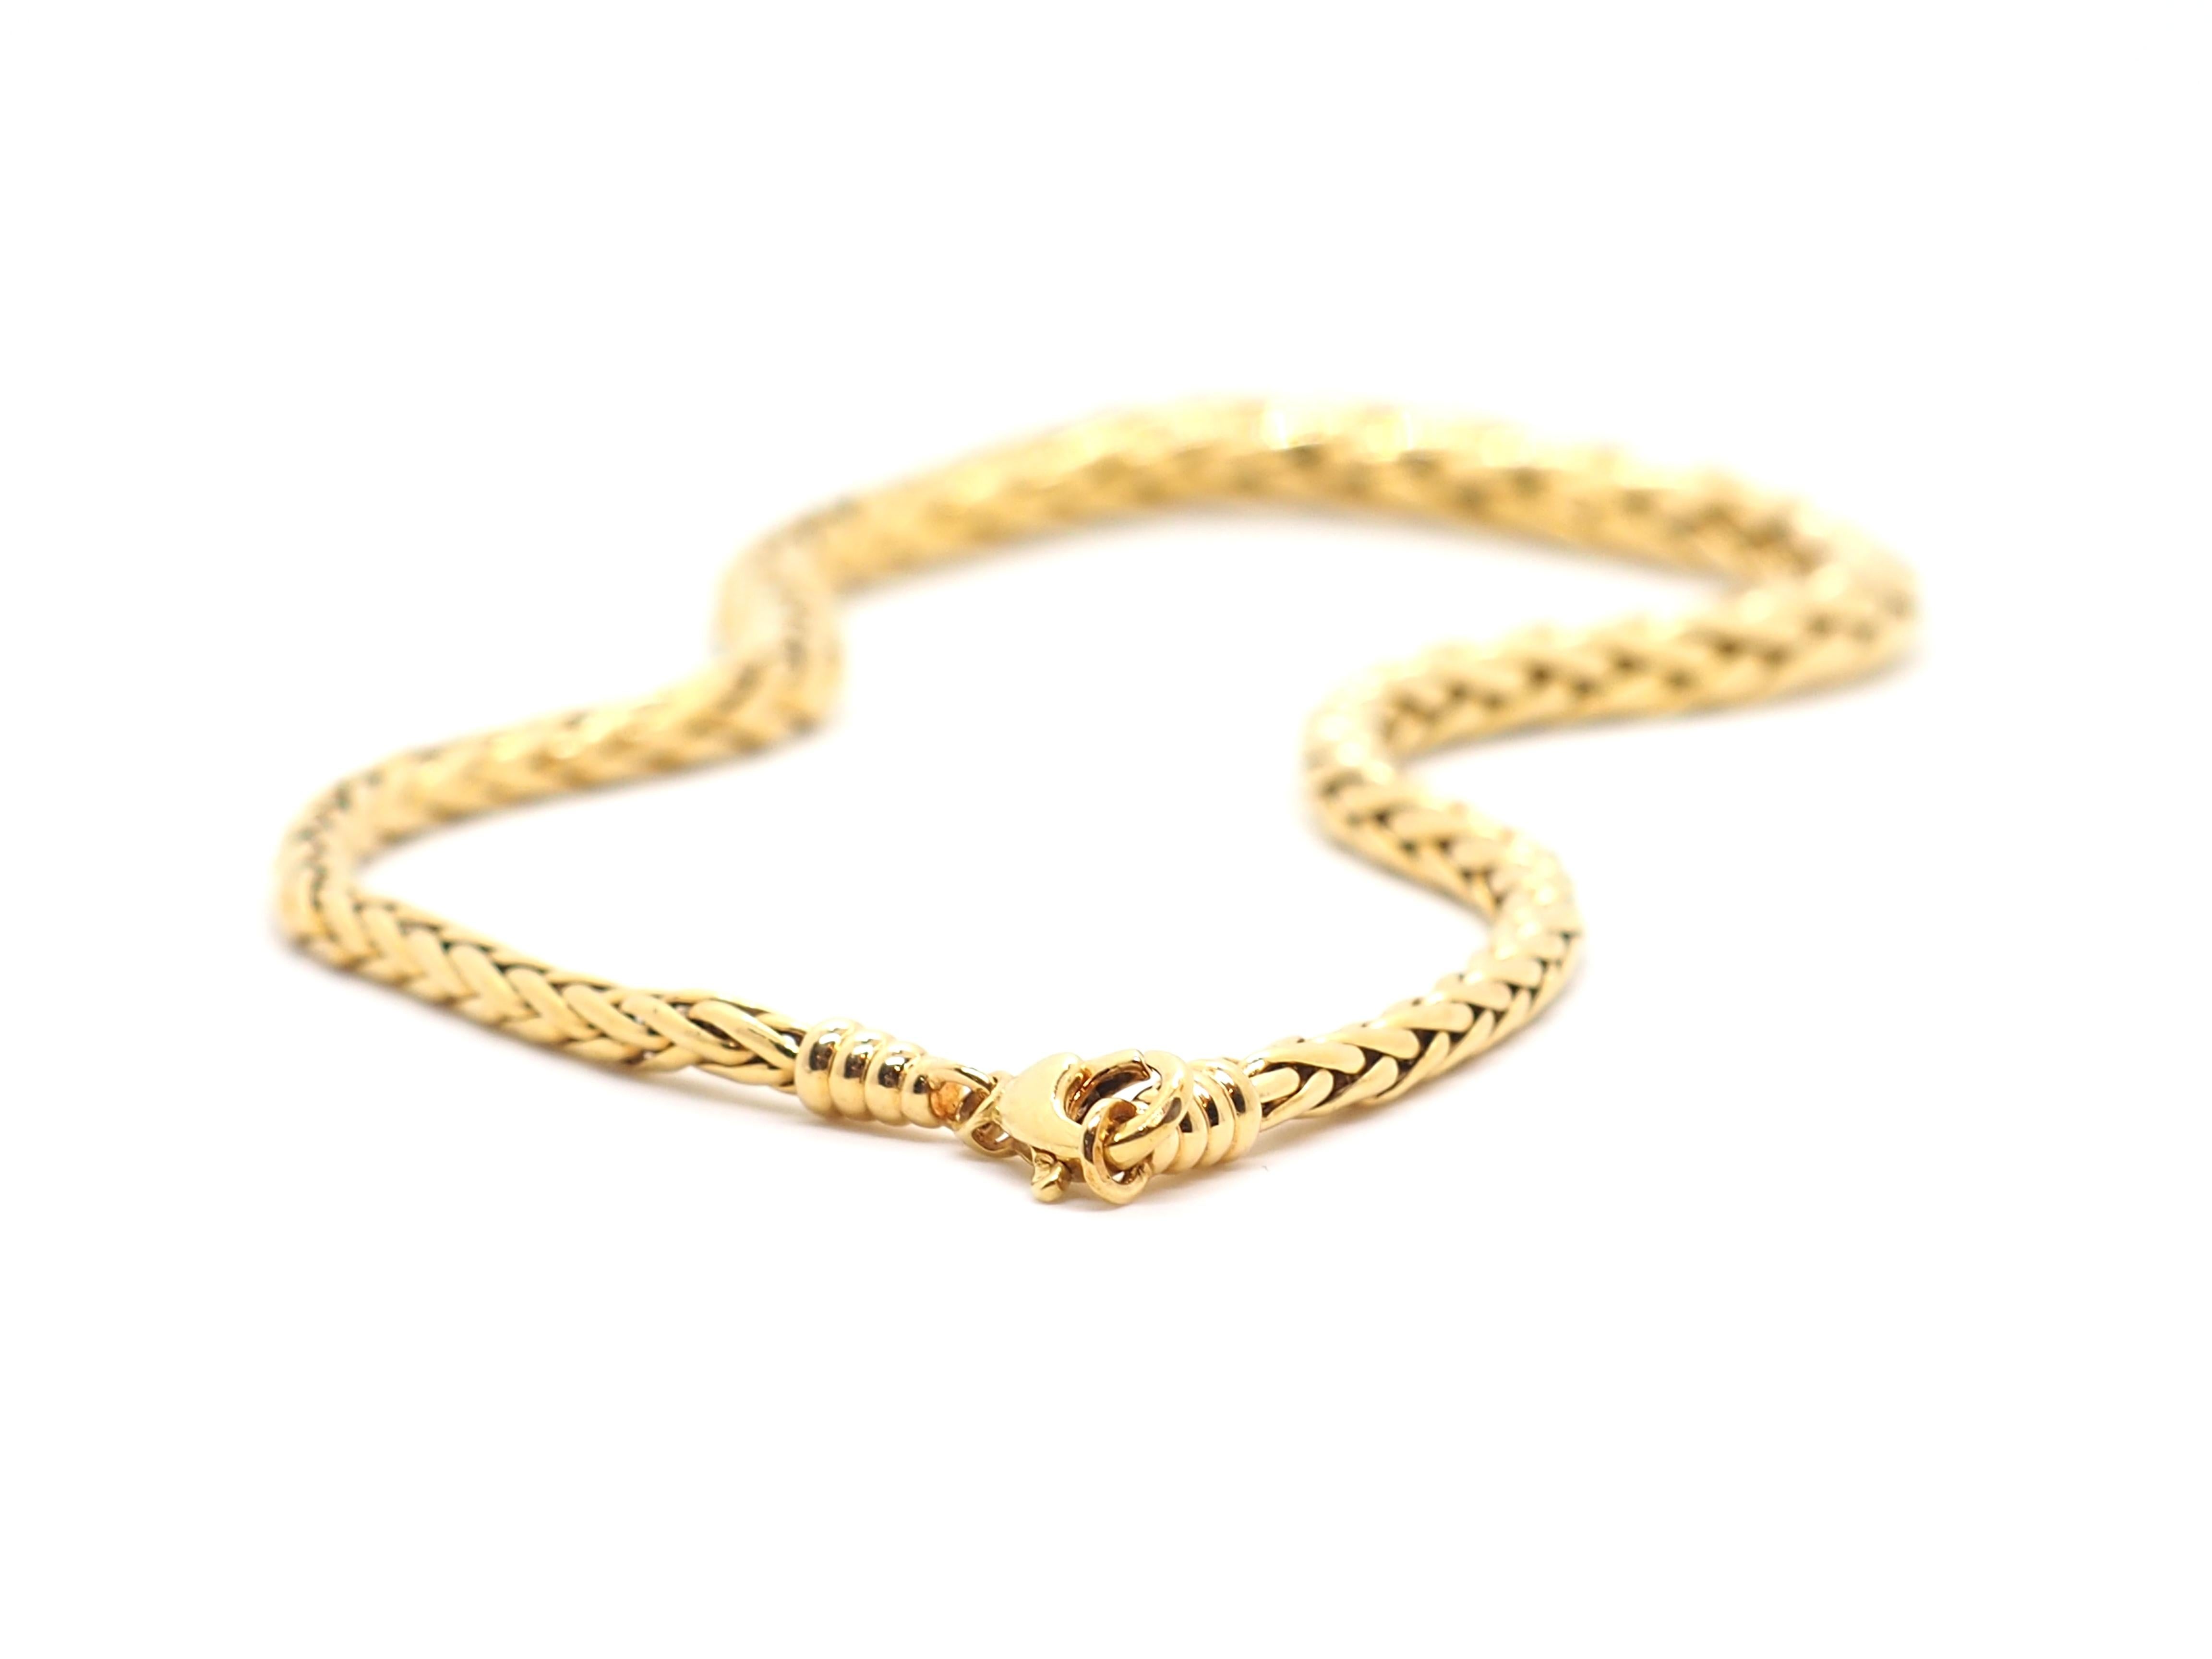 Wheat necklace made of 18 Karat yellow gold. This necklace is wider in the center part and narrower towards the side. 
This exquisite gold chain necklace is made of 18 karat gold, ensuring superior quality and durability. 
The necklace features a